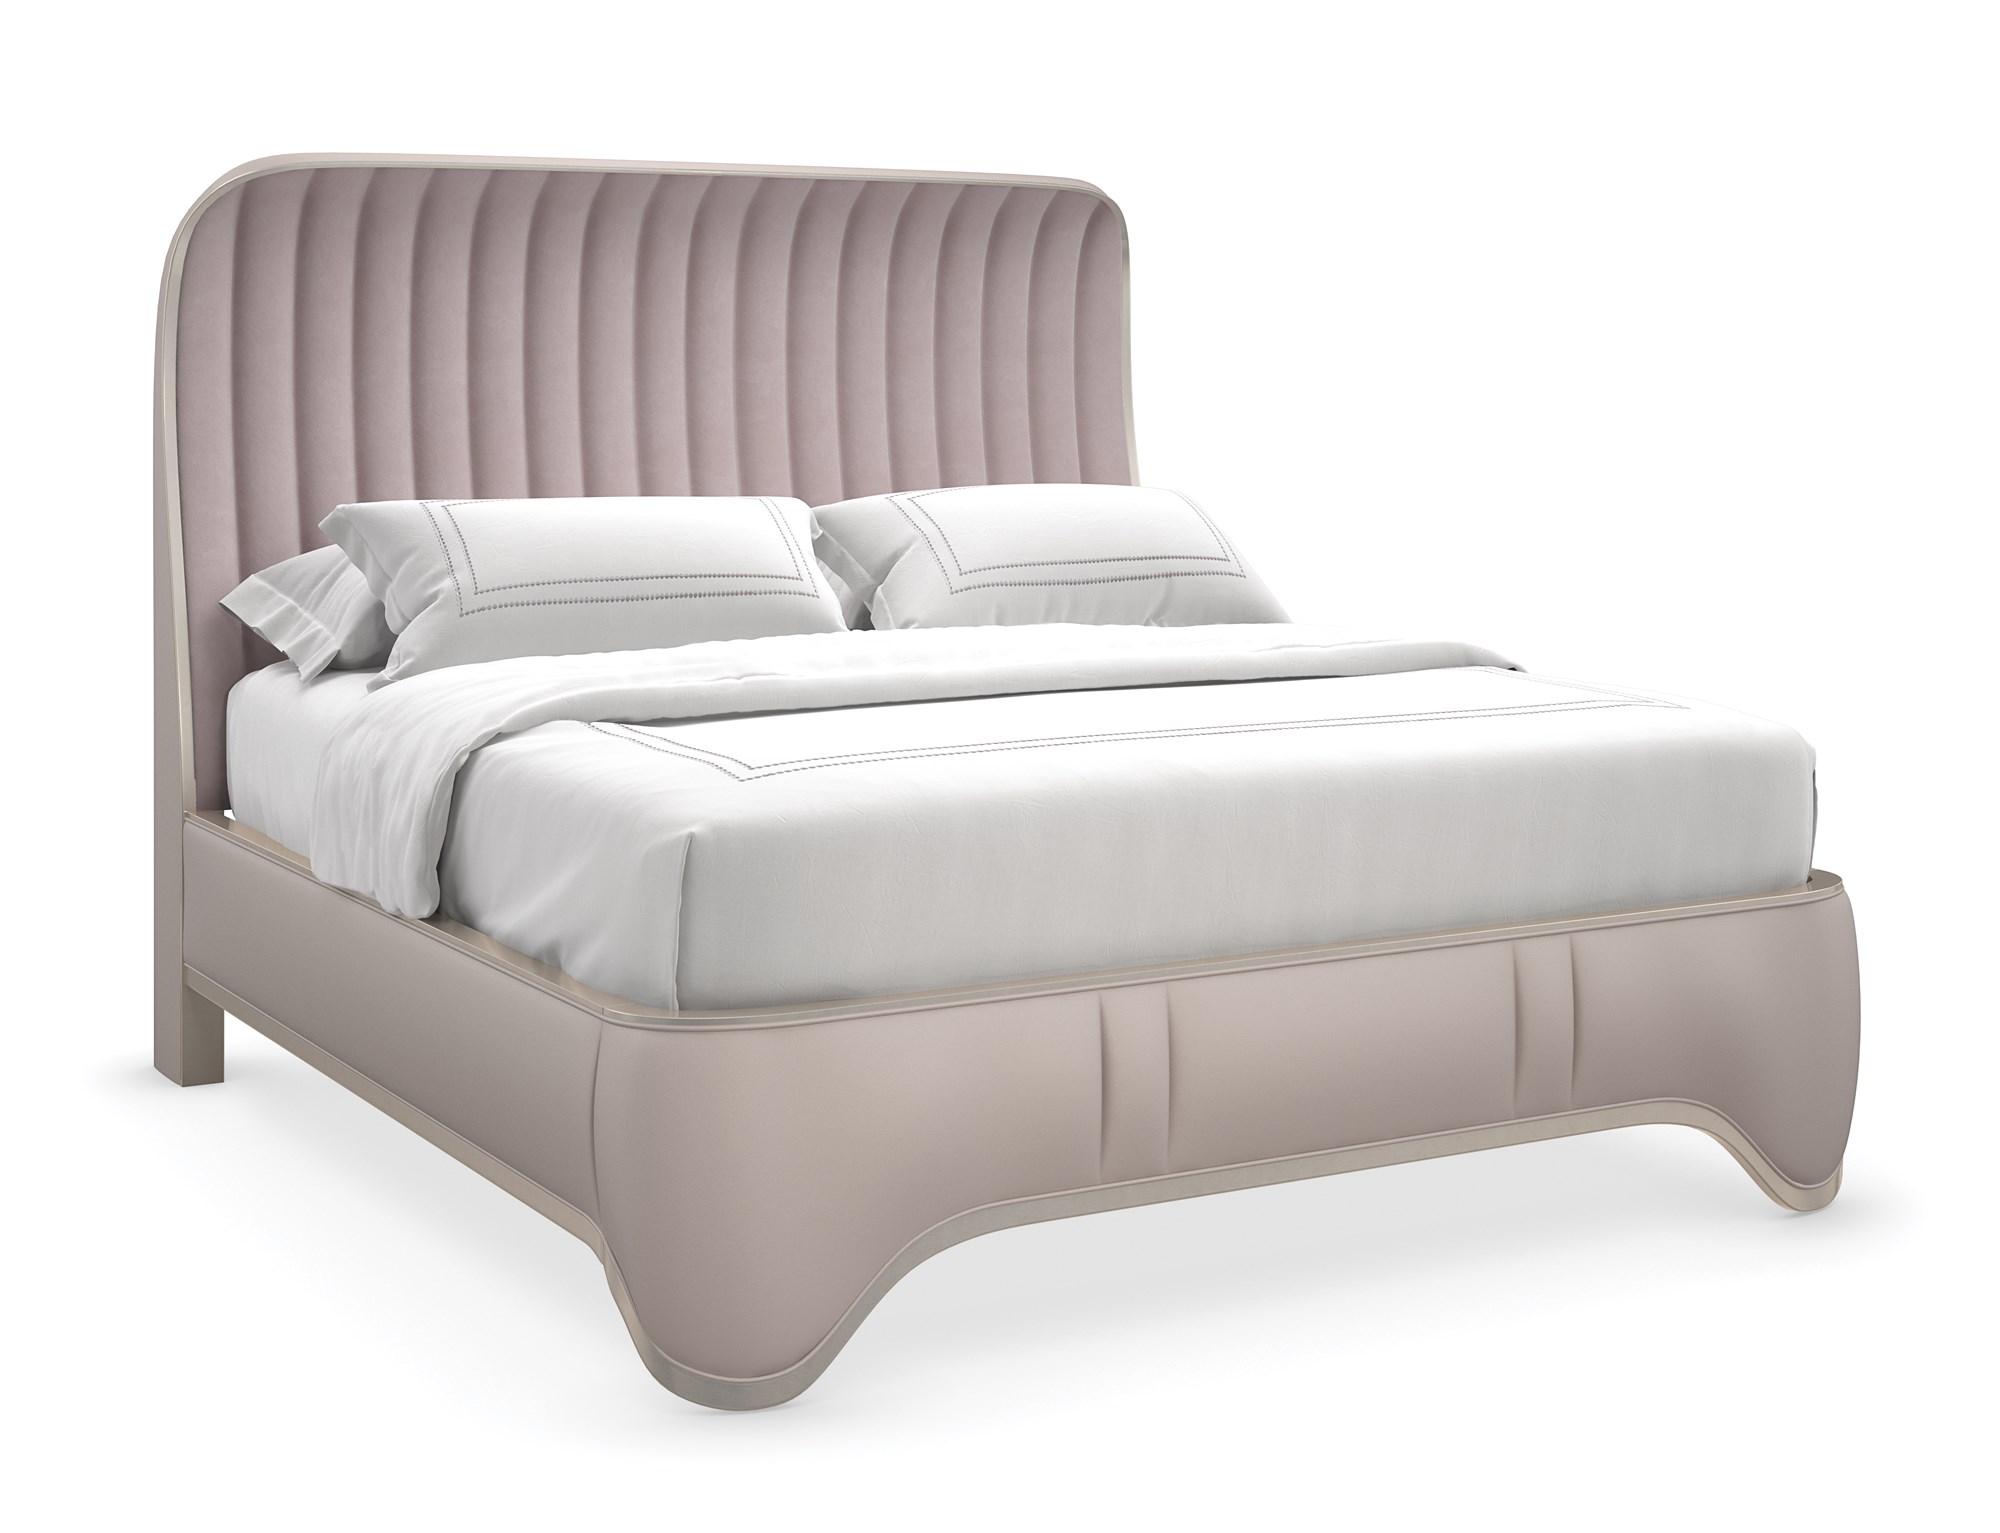 Contemporary Platform Bed THE OXFORD UPH KING BED C103-422-121 in Metallic Fabric